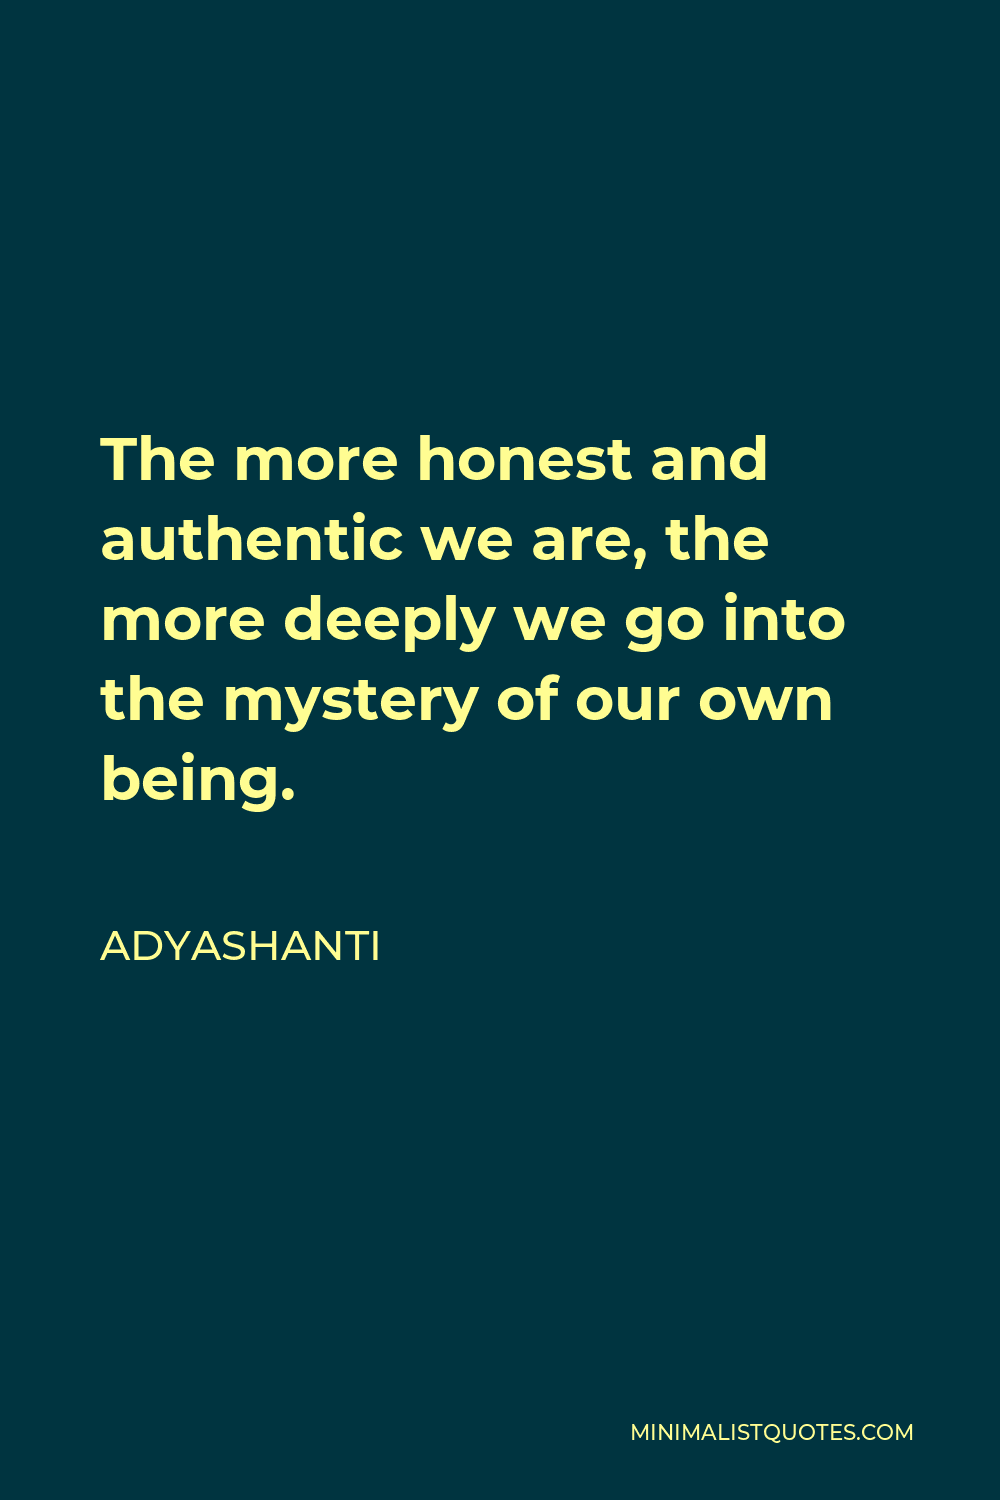 Adyashanti Quote - The more honest and authentic we are, the more deeply we go into the mystery of our own being.